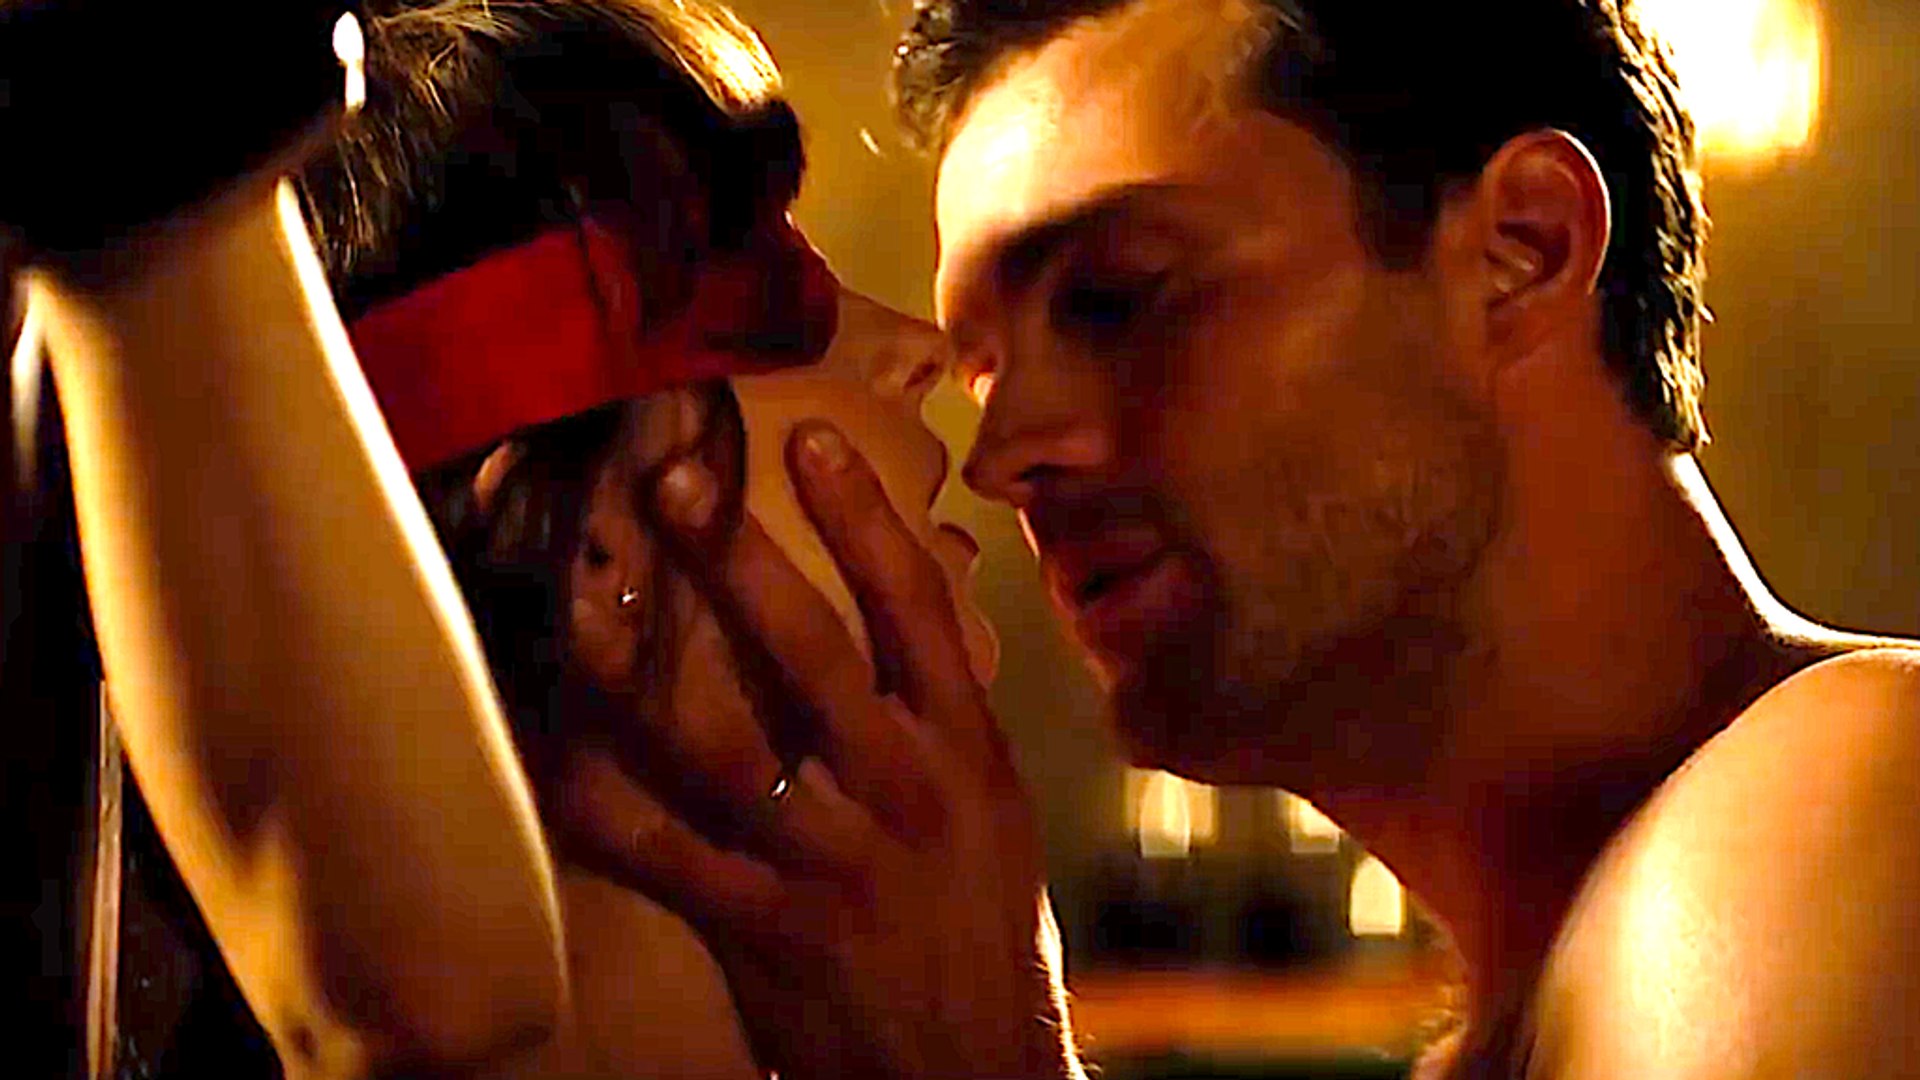 Fifty Shades Freed - Official Trailer - video Dailymotion